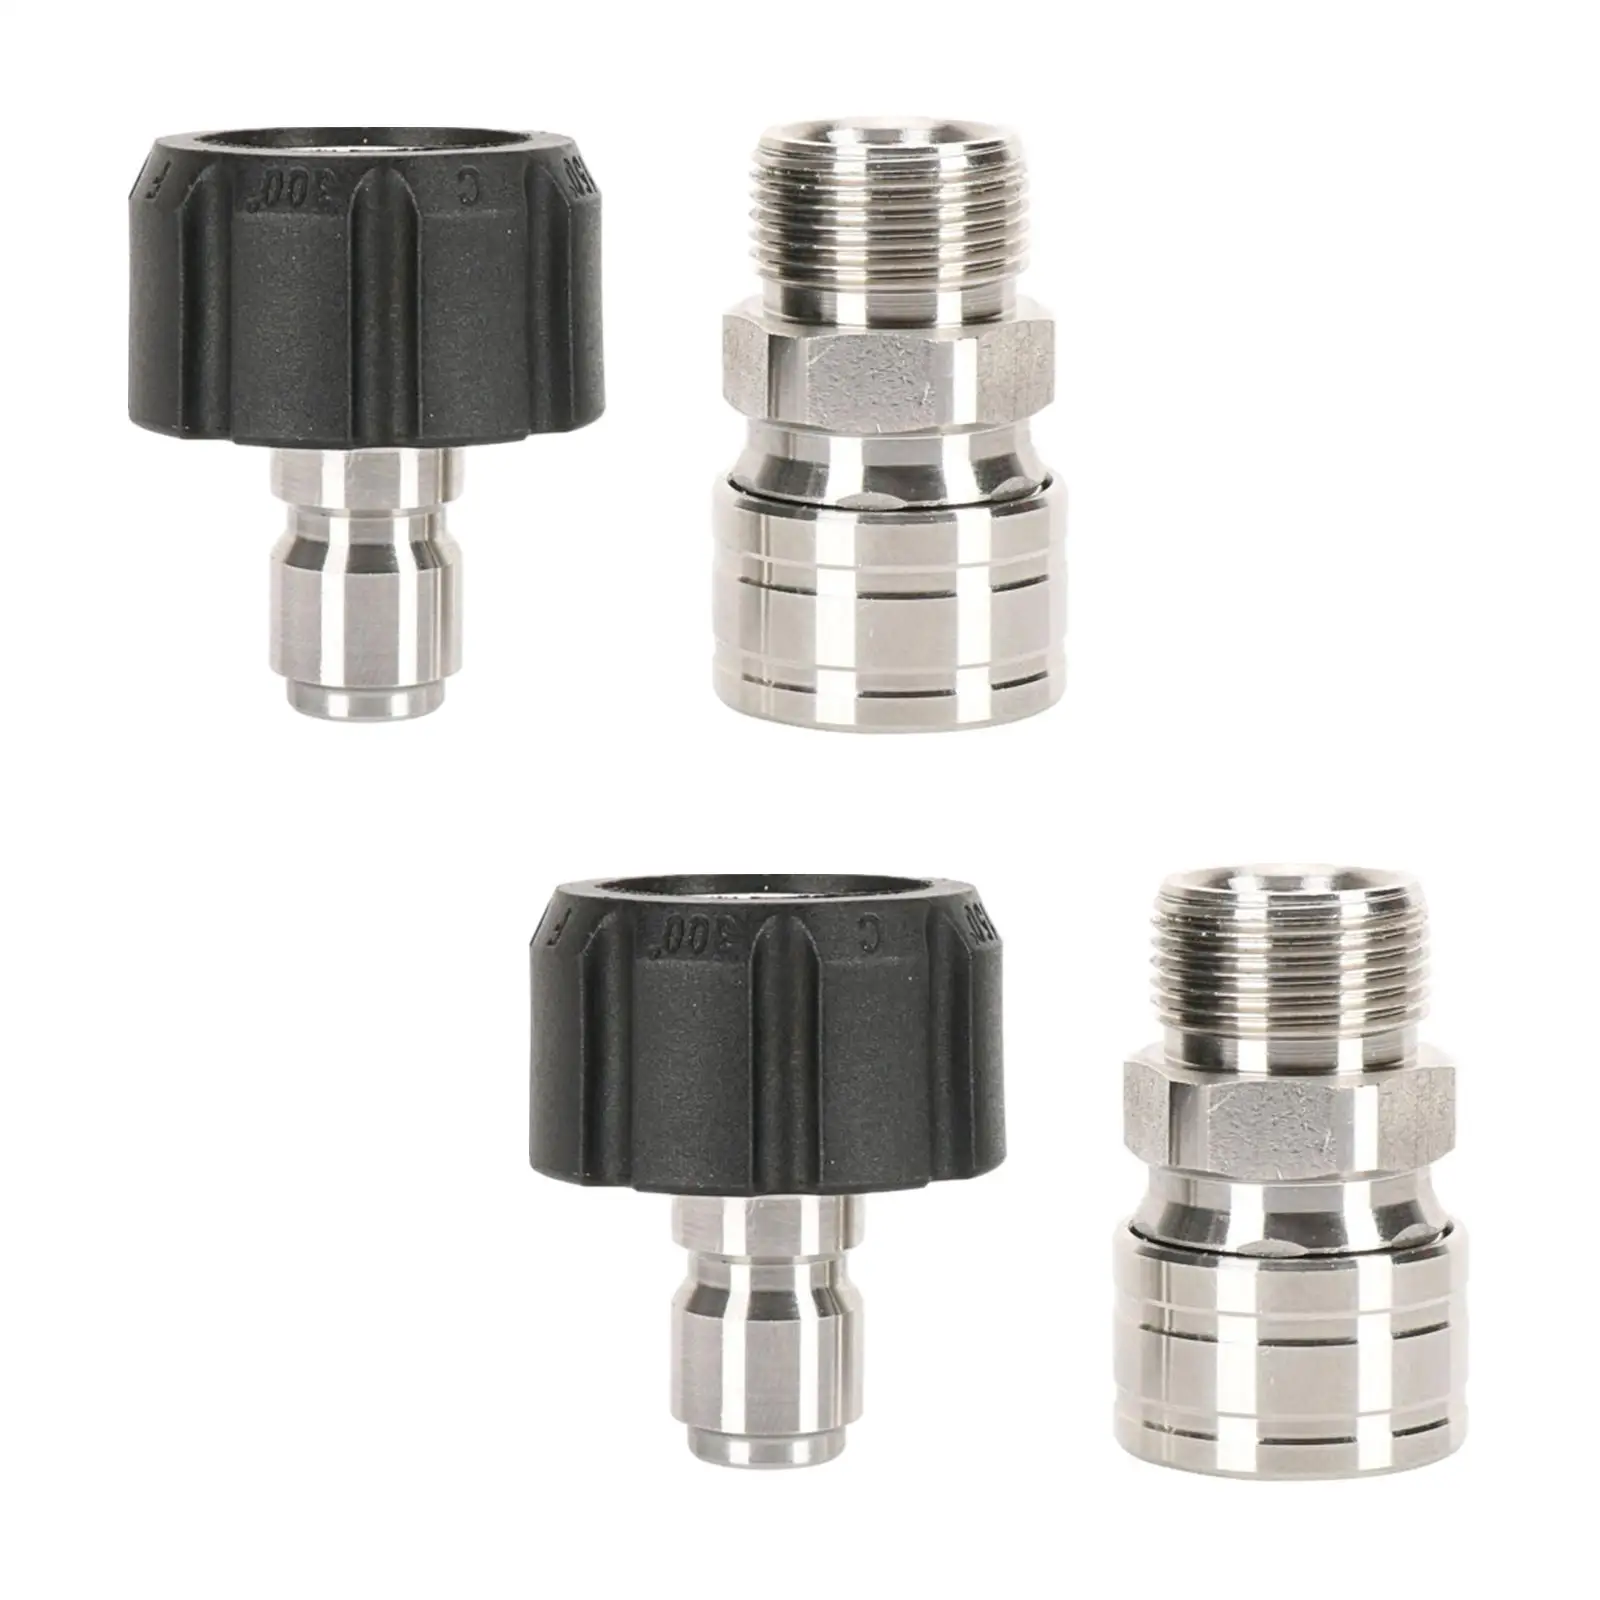 

2 Pieces Pressure Washer Adapter Cars Washing Accessories Fittings Replaces High Pressure Washers M22 to 3/8'' Quick Connect